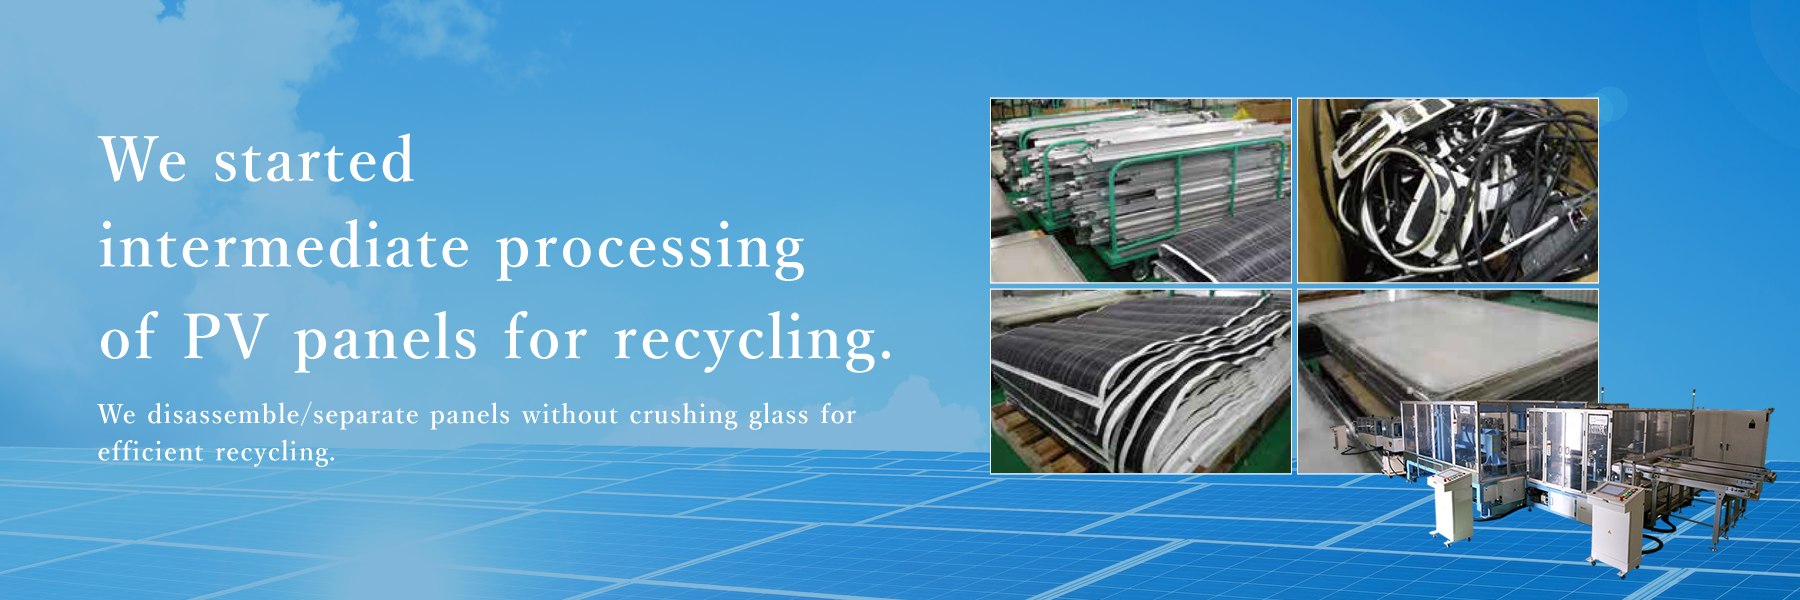 We started intermediate processing of PV panels for recycling. We disassemble/separate panels without crushing glass for efficient recycling.